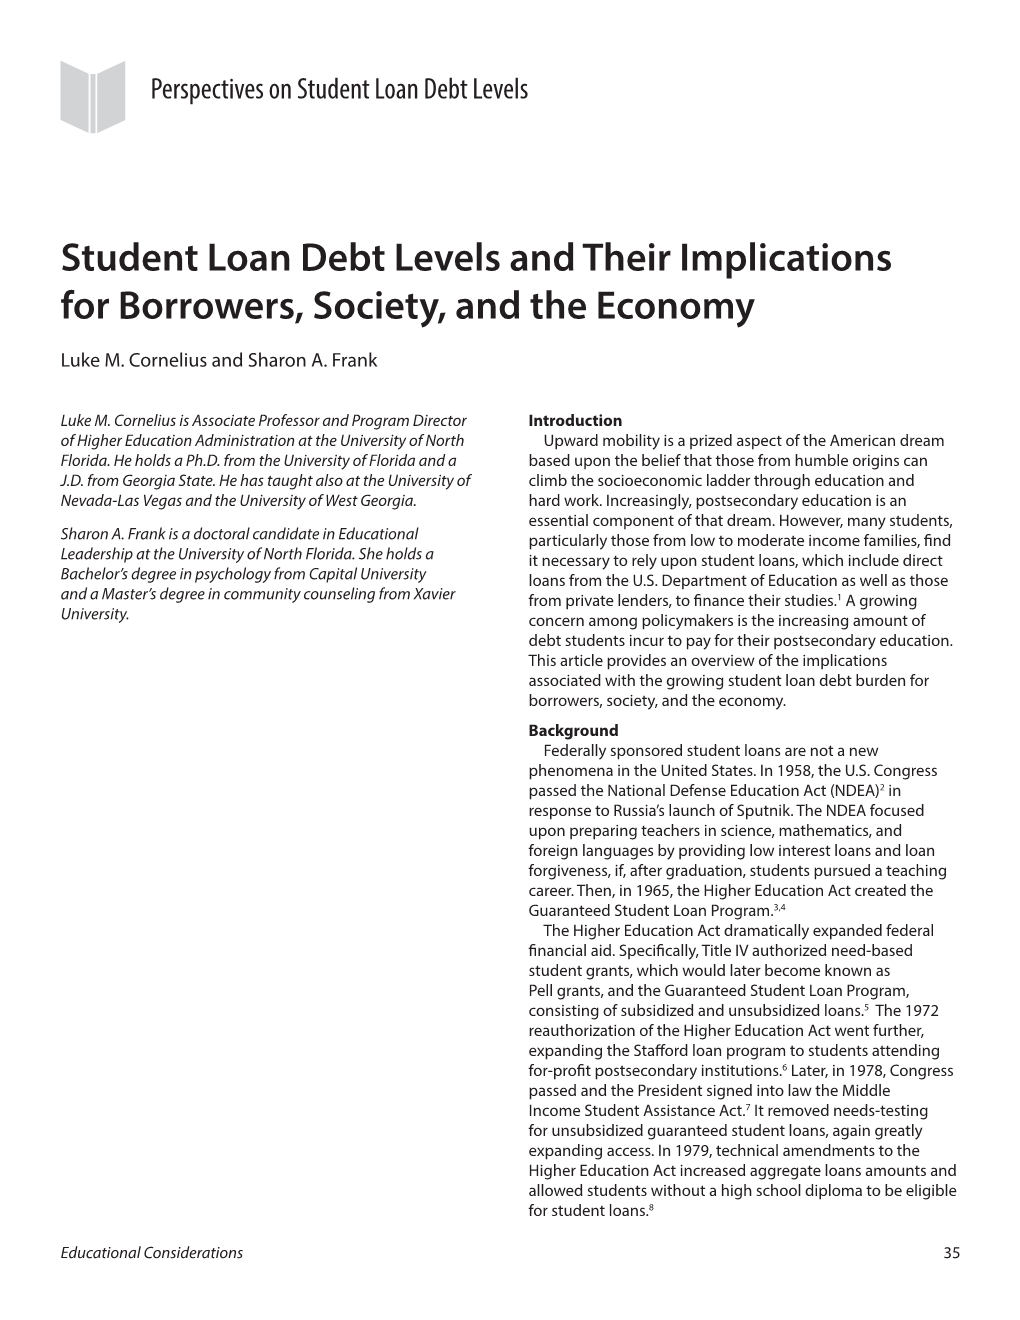 Student Loan Debt Levels and Their Implications for Borrowers, Society, and the Economy